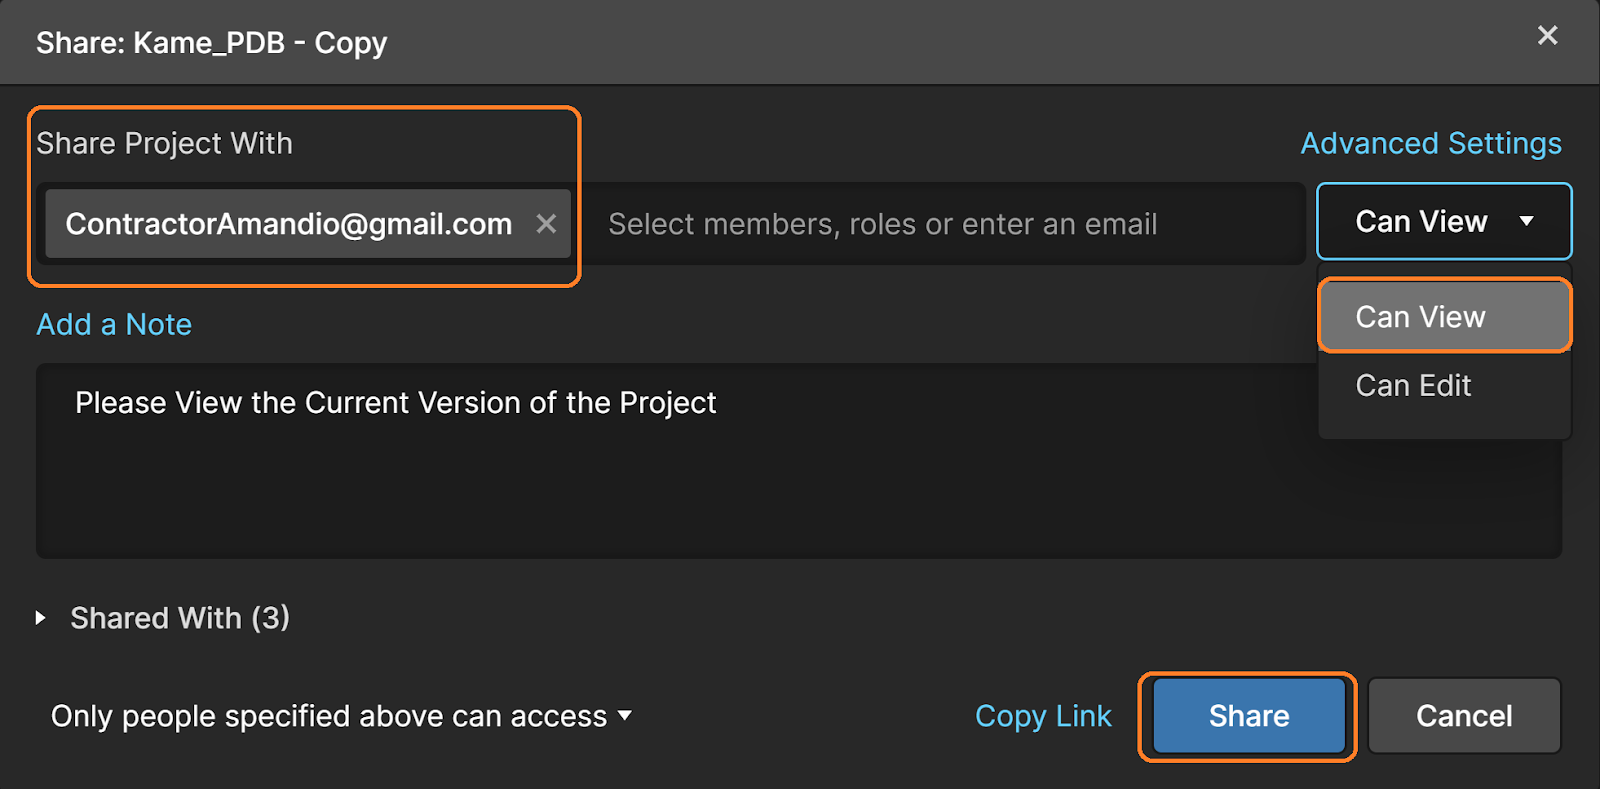 Fig. 6 – "Share Project With" dialog